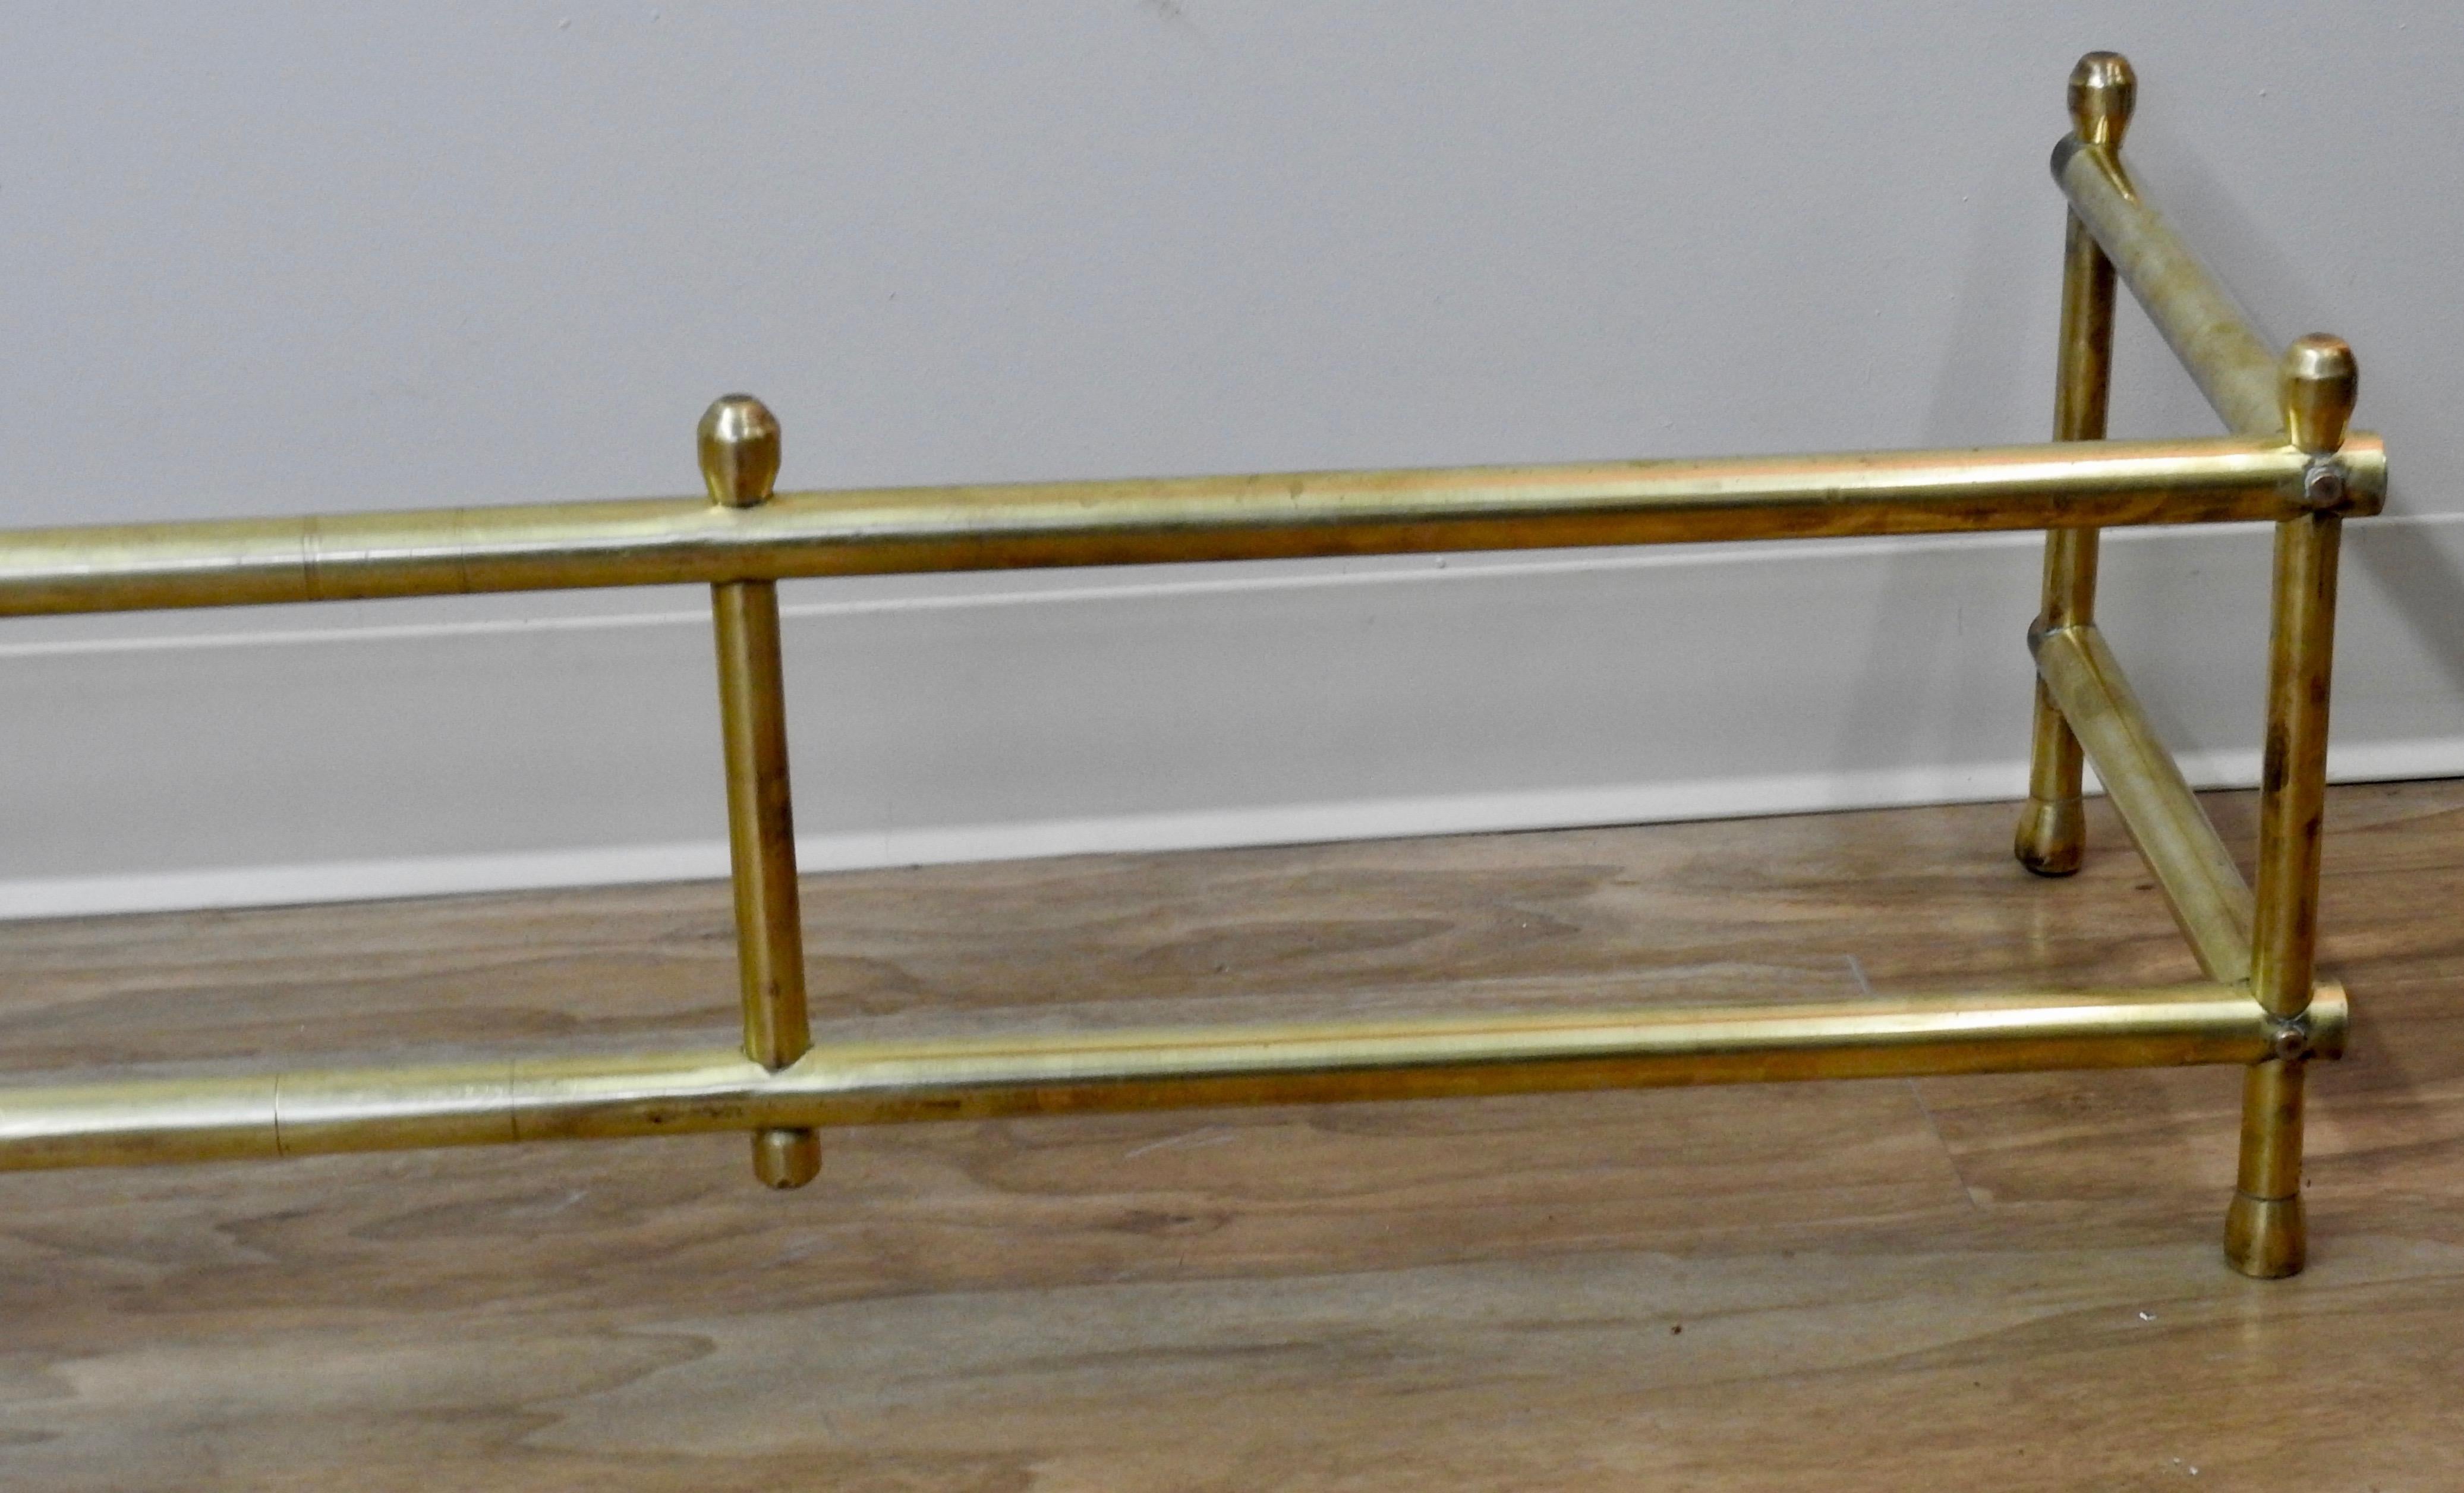 This beautiful 20th century solid brass fireplace surround is simple. Clean lines with a statement. It starts on a small tapered bun foot. Going up in simple vertical and horizontal lines capped with the same top as the feet.